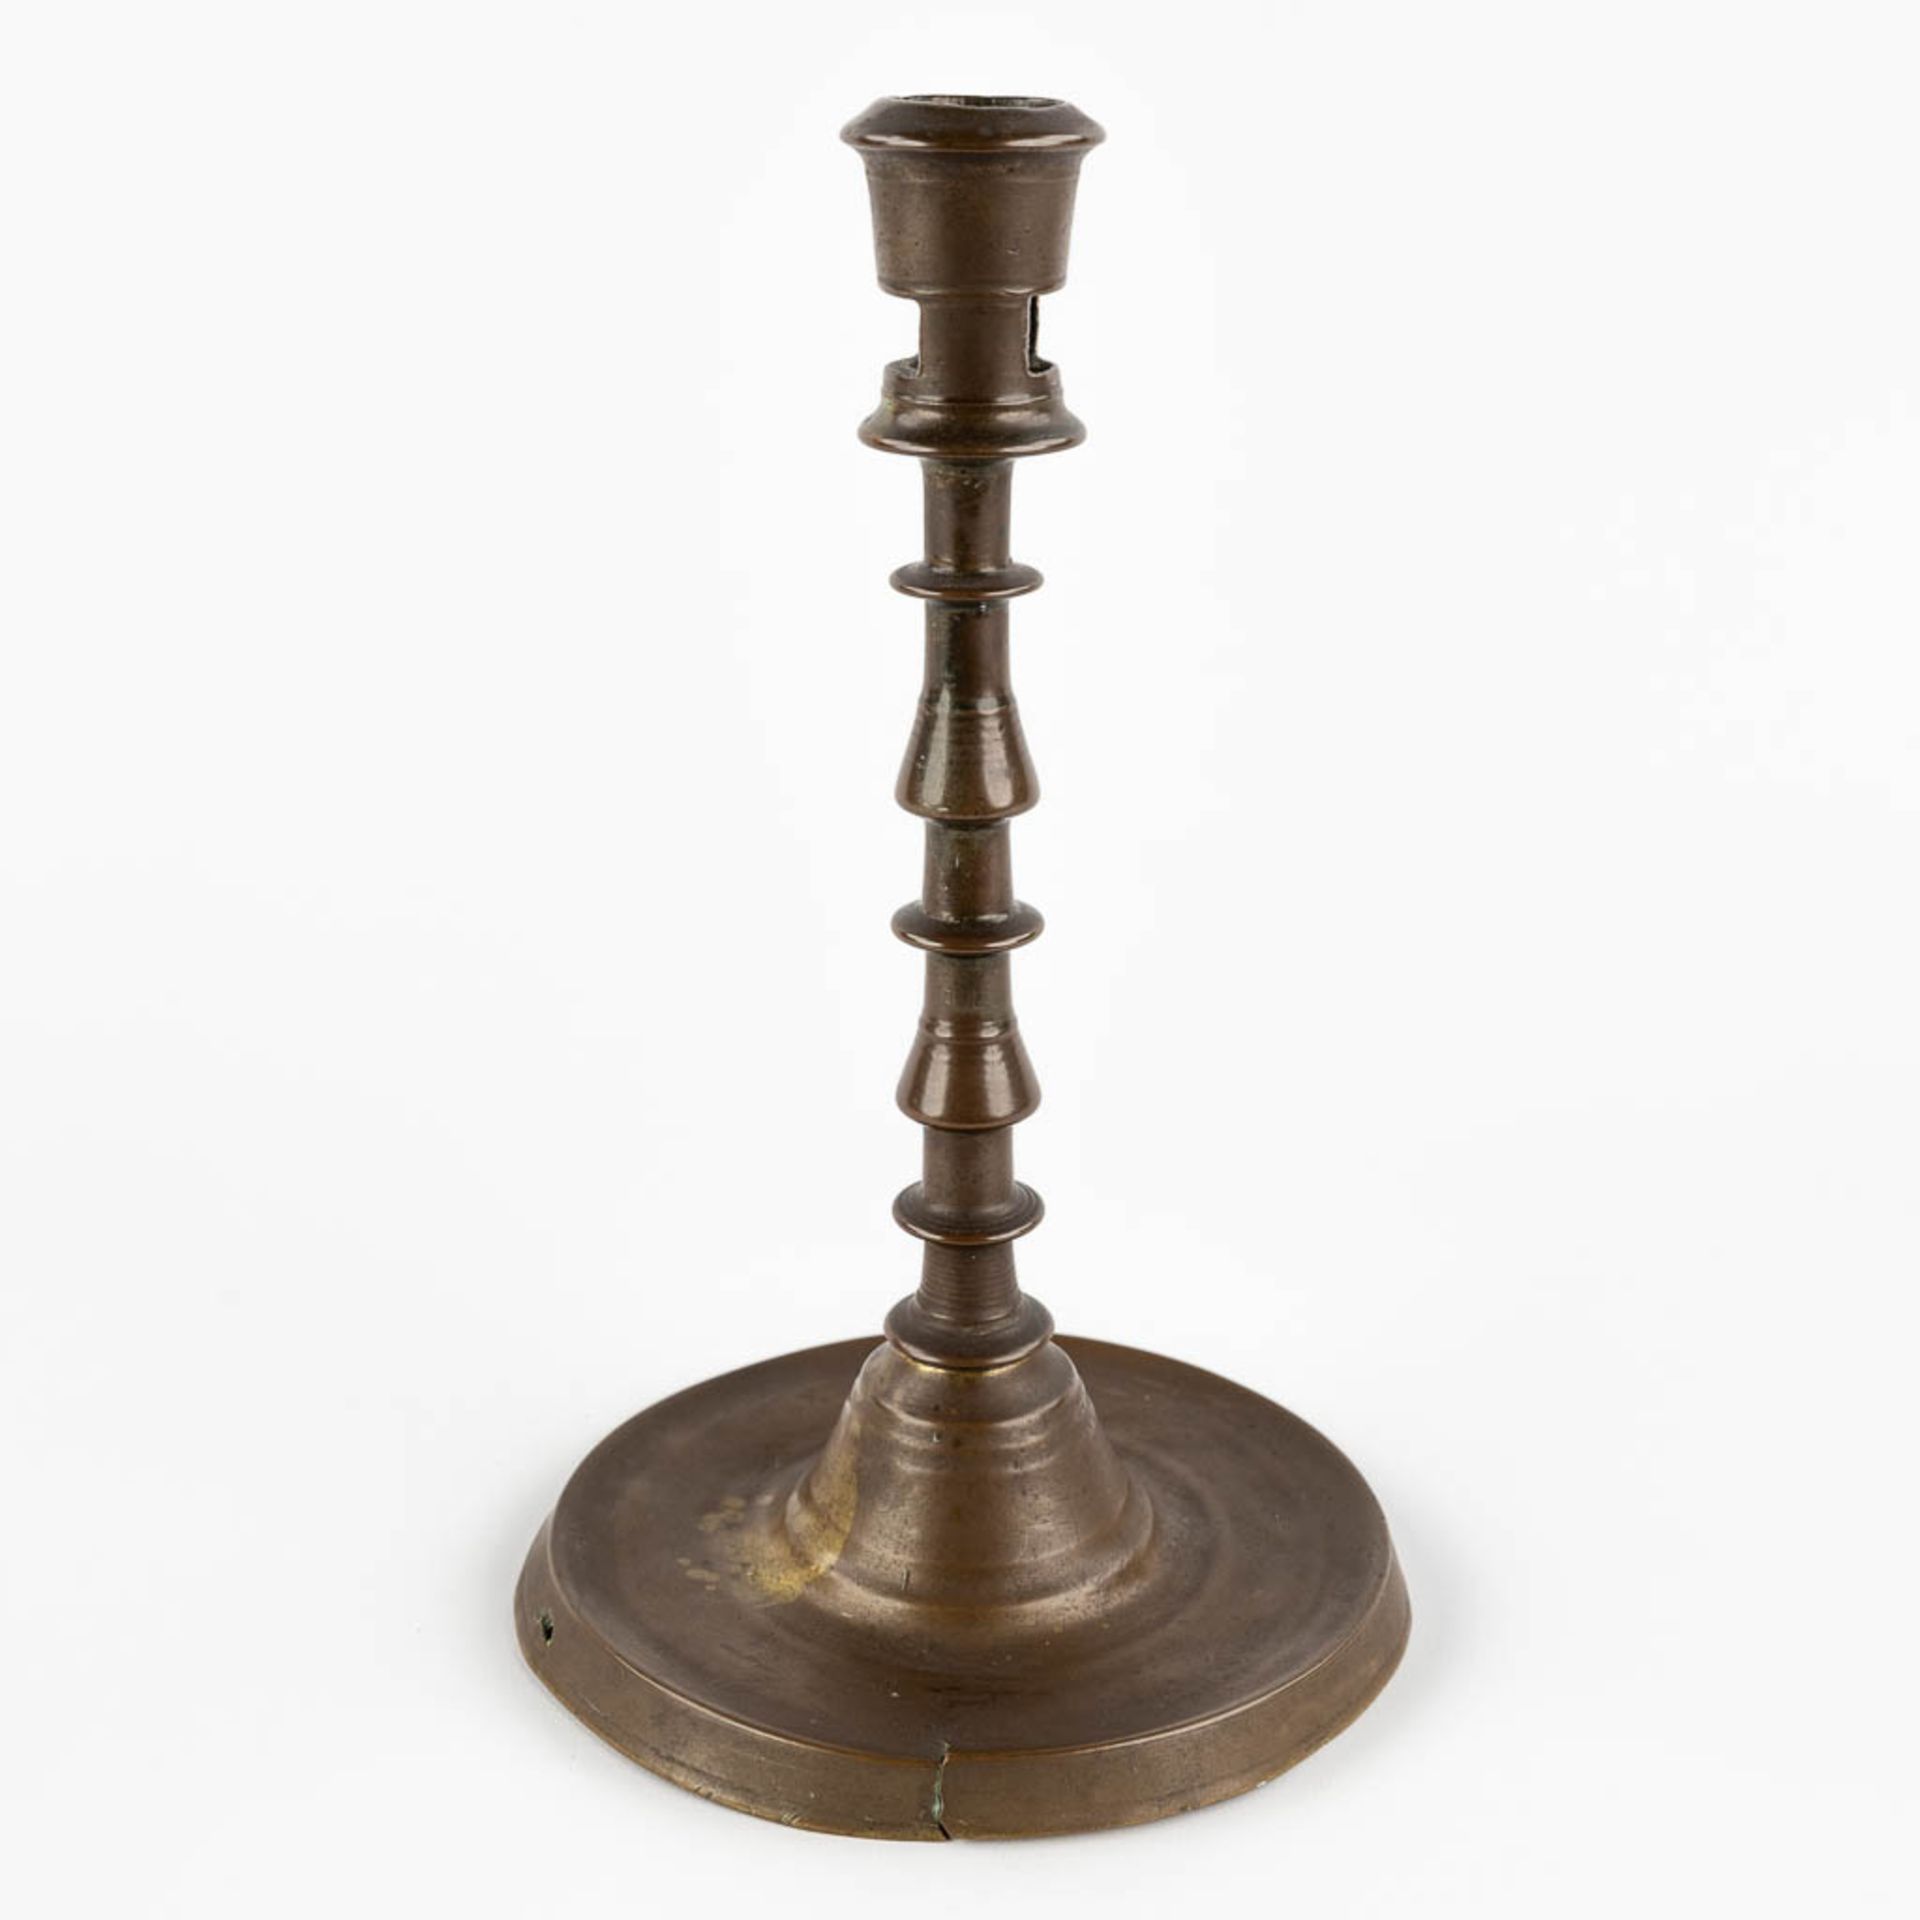 An antique candlestick, Flanders or The Netherlands, 16th C. (H:24,5 x D:14,5 cm) - Image 3 of 11